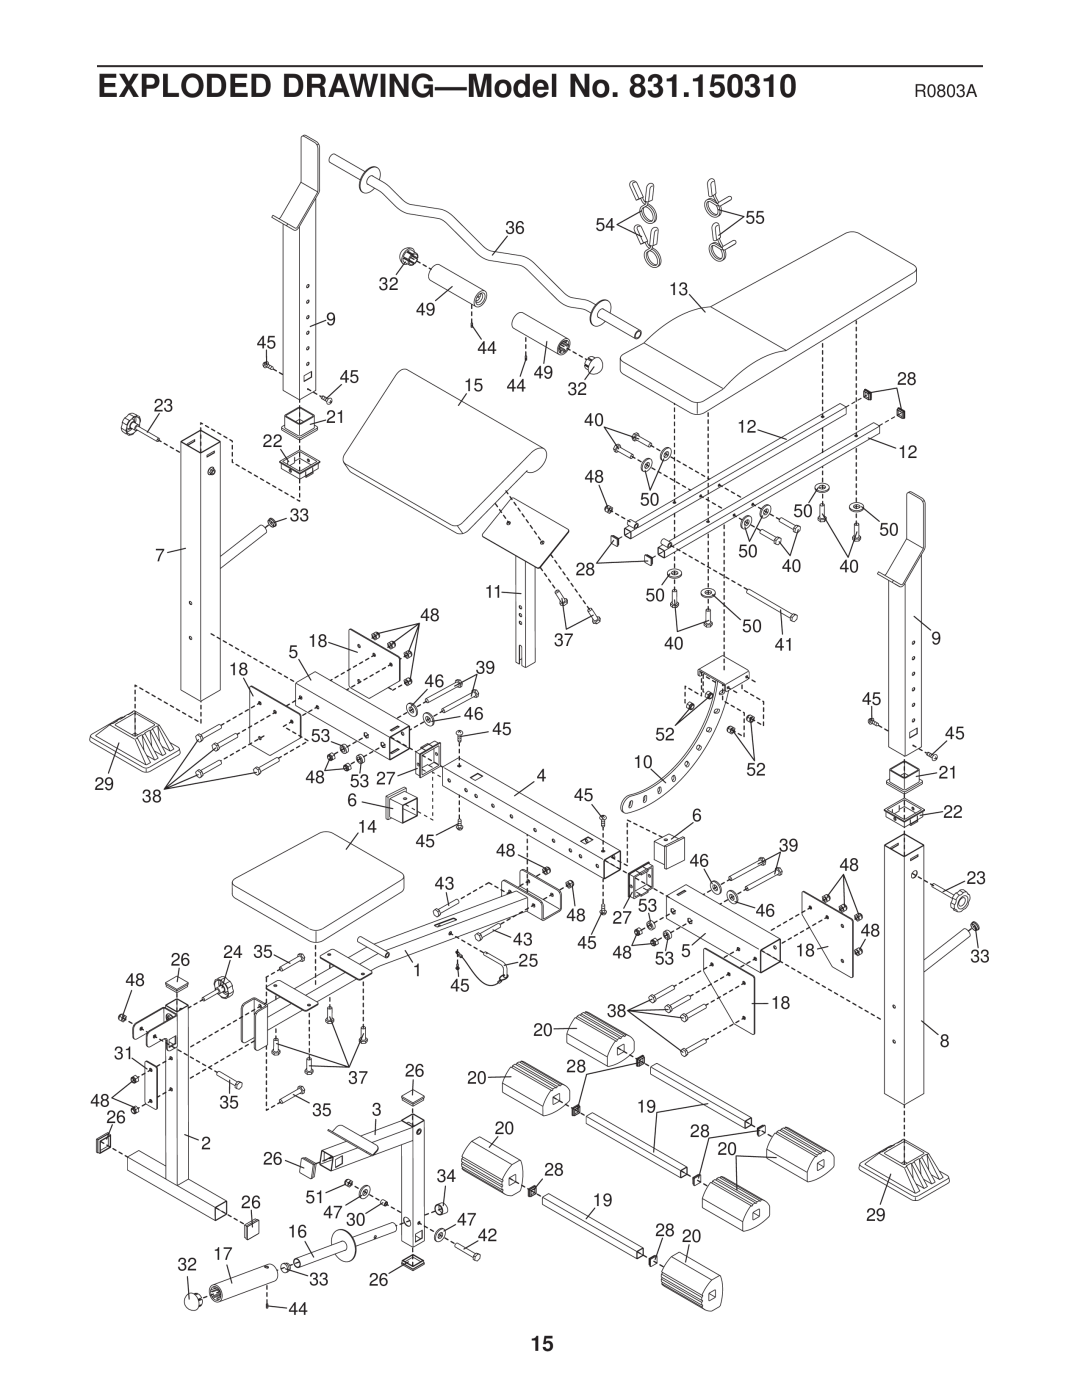 Weider 831.150310 user manual EXPLODED DRAWING-Model No, R0803A 